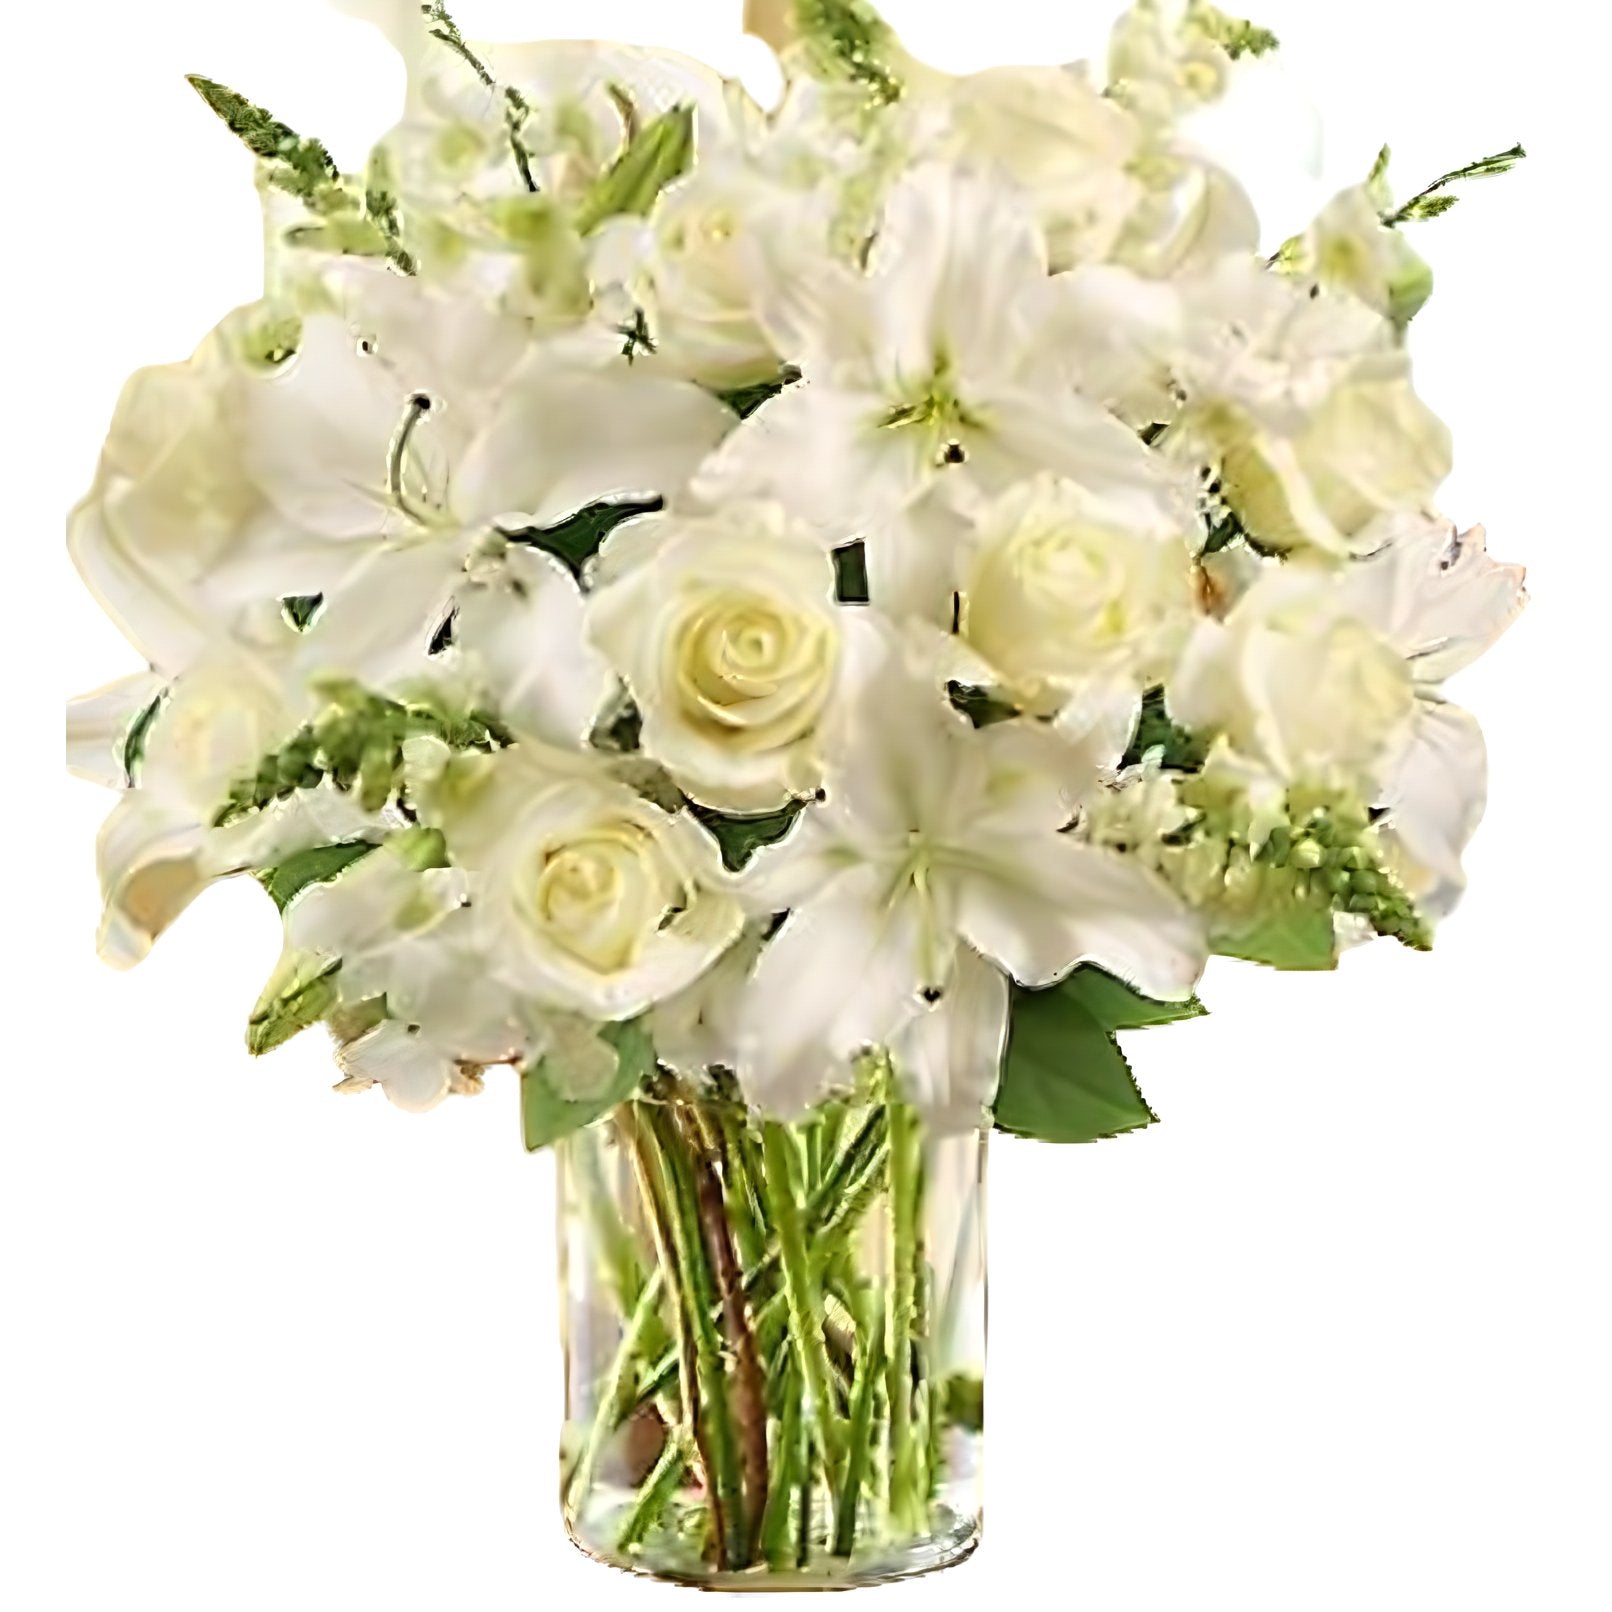 Classic All White Arrangement for Sympathy - Floral_Arrangement - Flower Delivery NYC